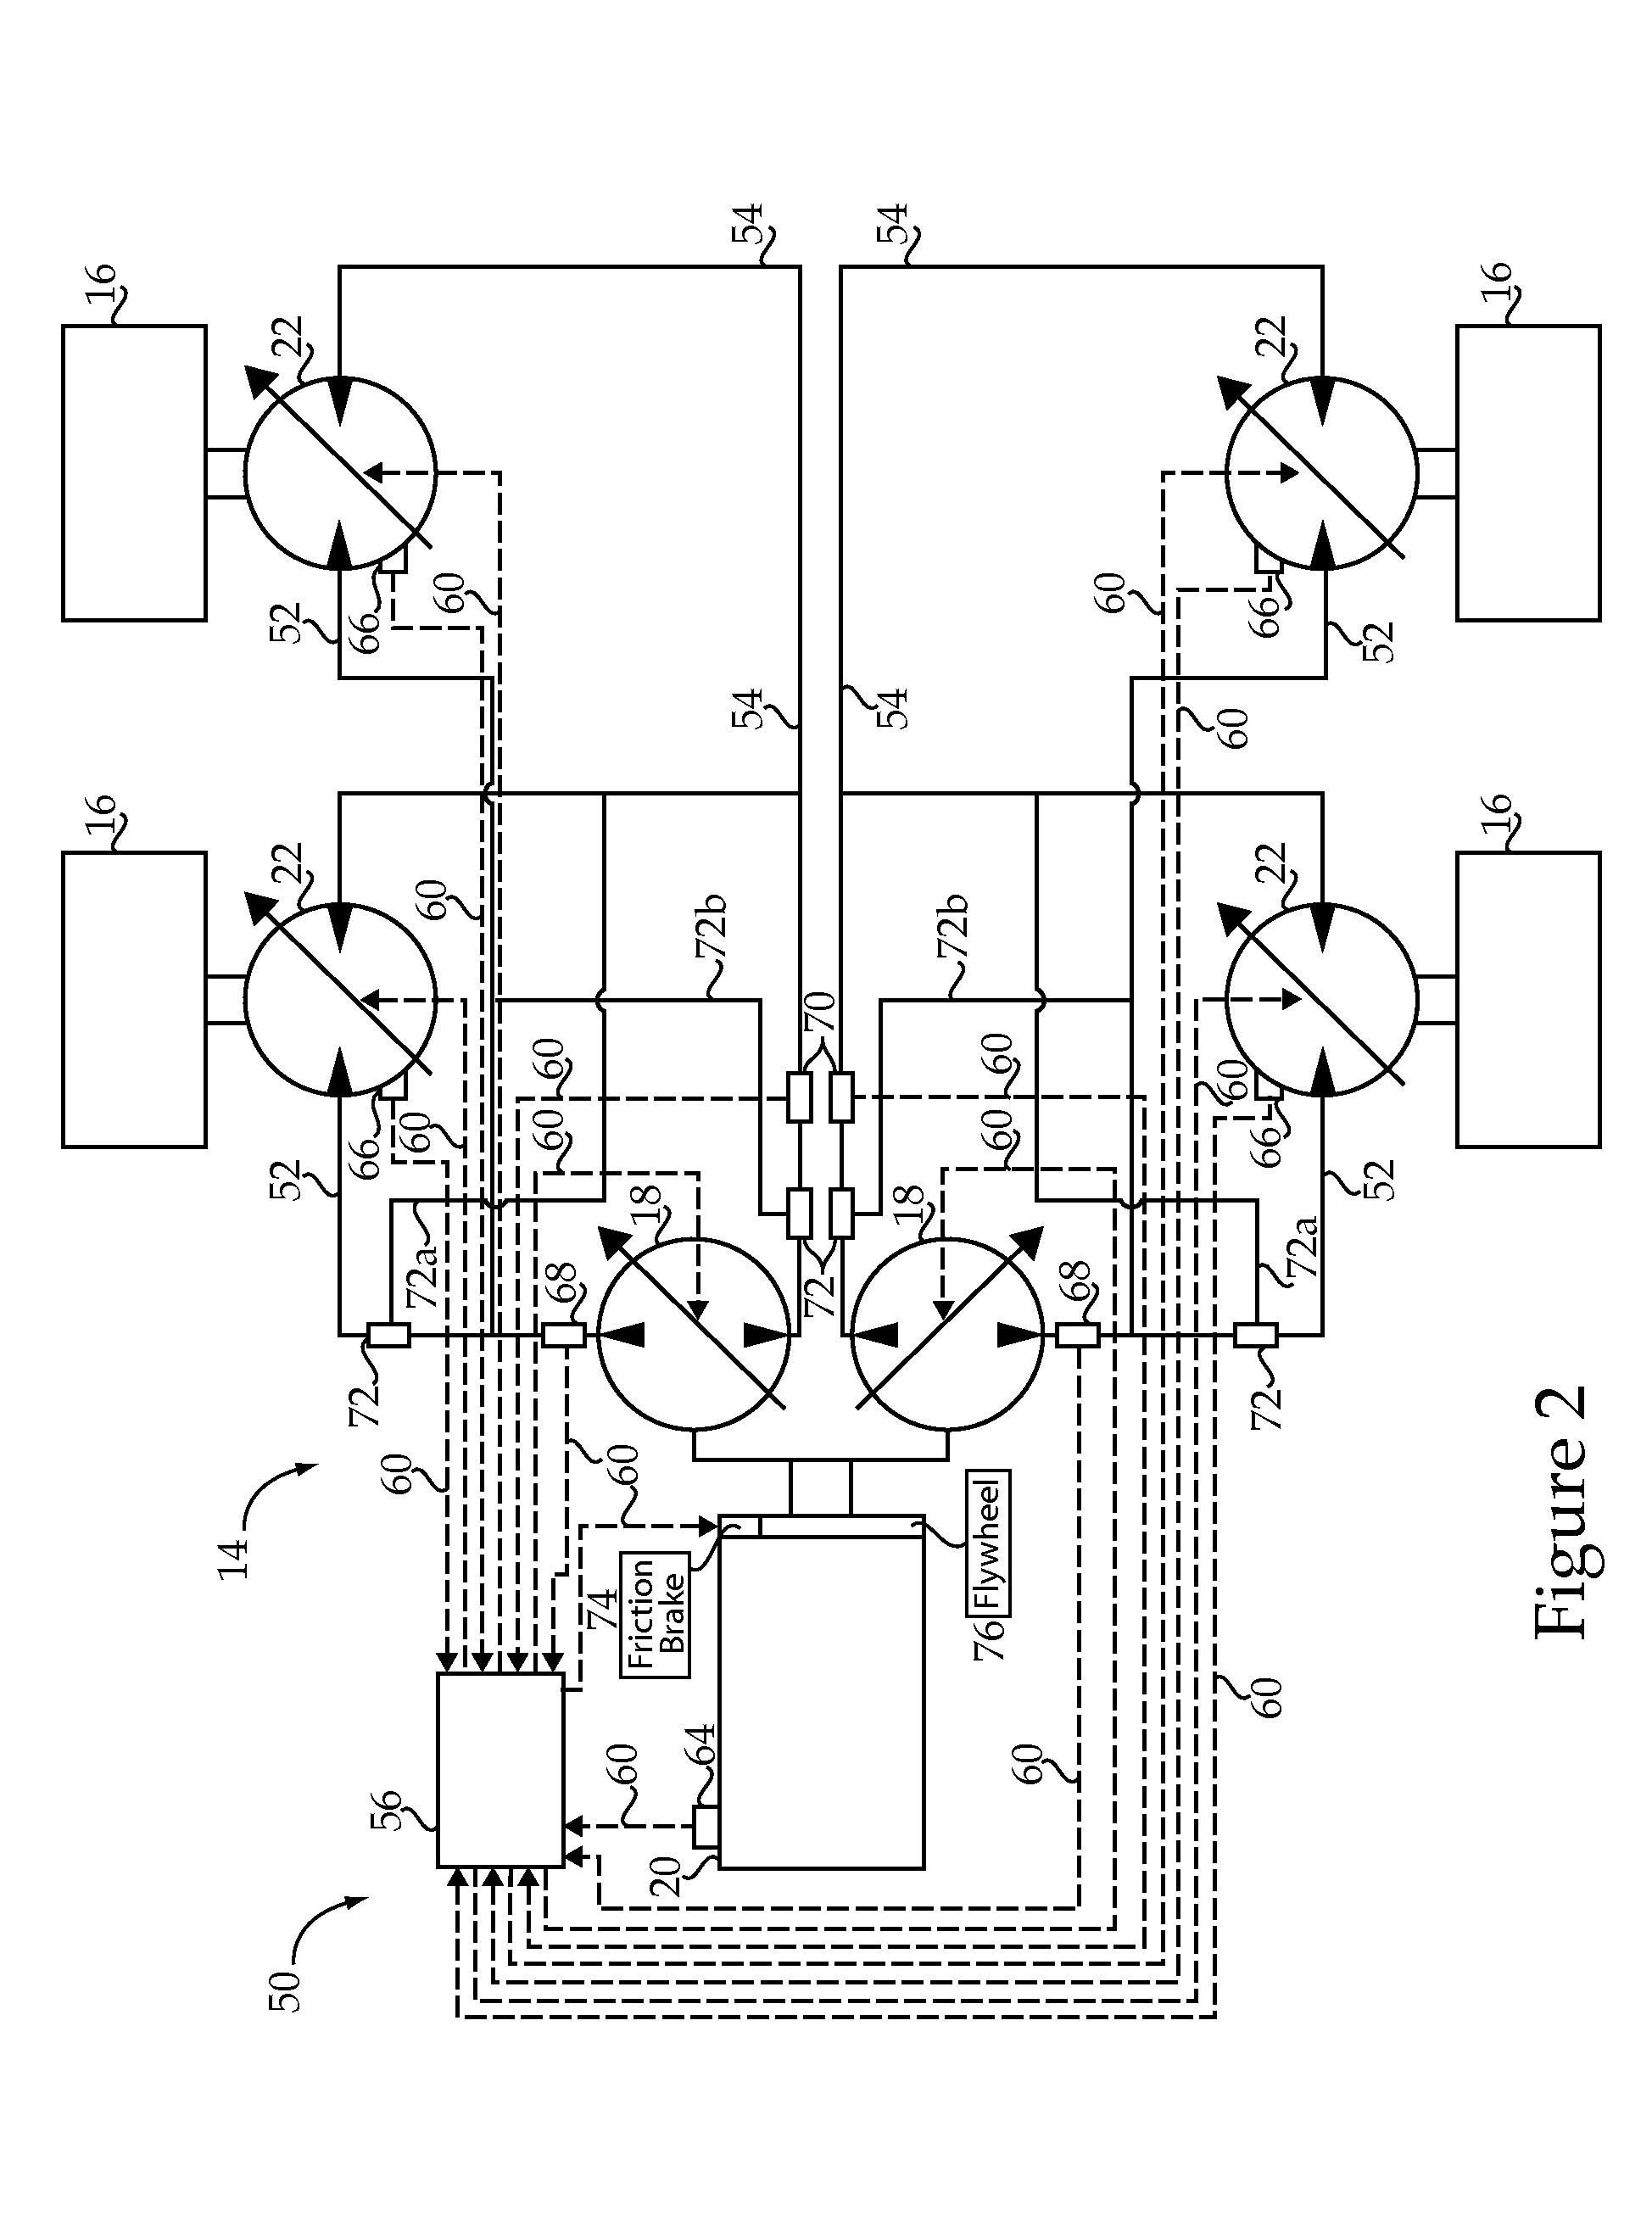 Control system and method for braking a hydrostatic drive machine